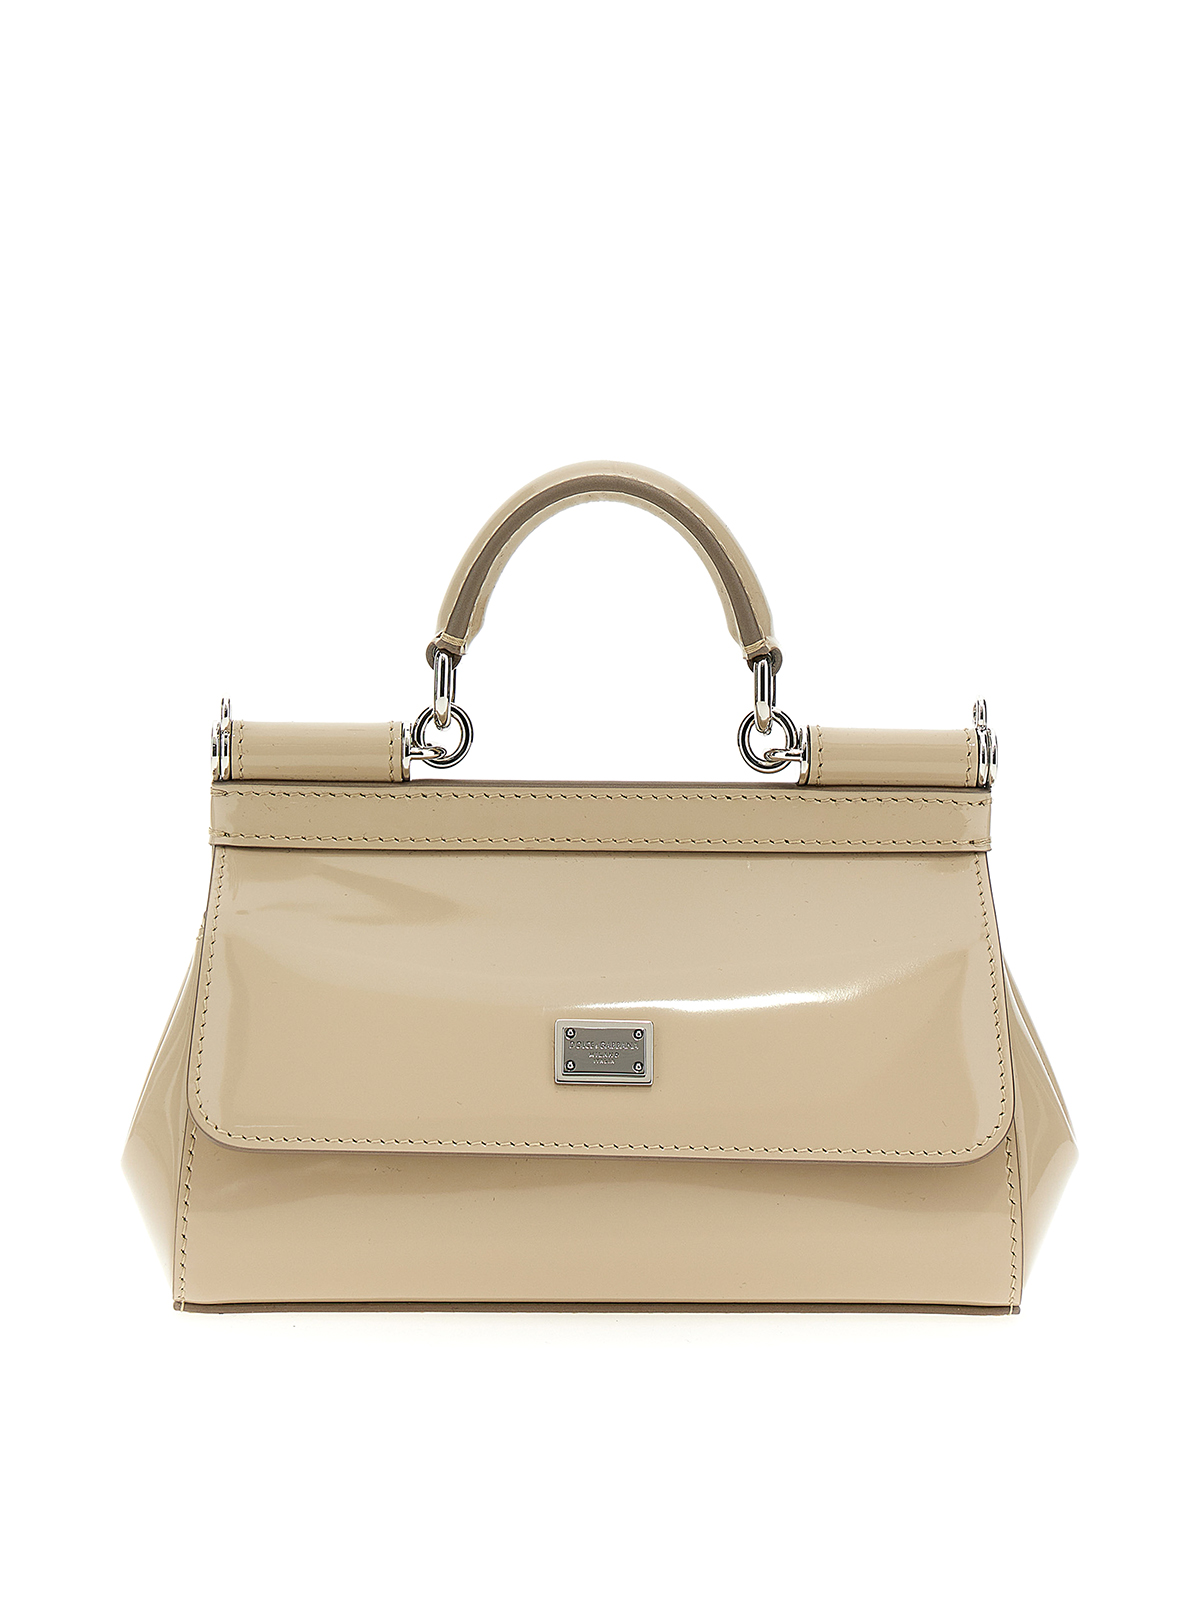 Dolce & Gabbana Sicily Small Leather Bag In Beige